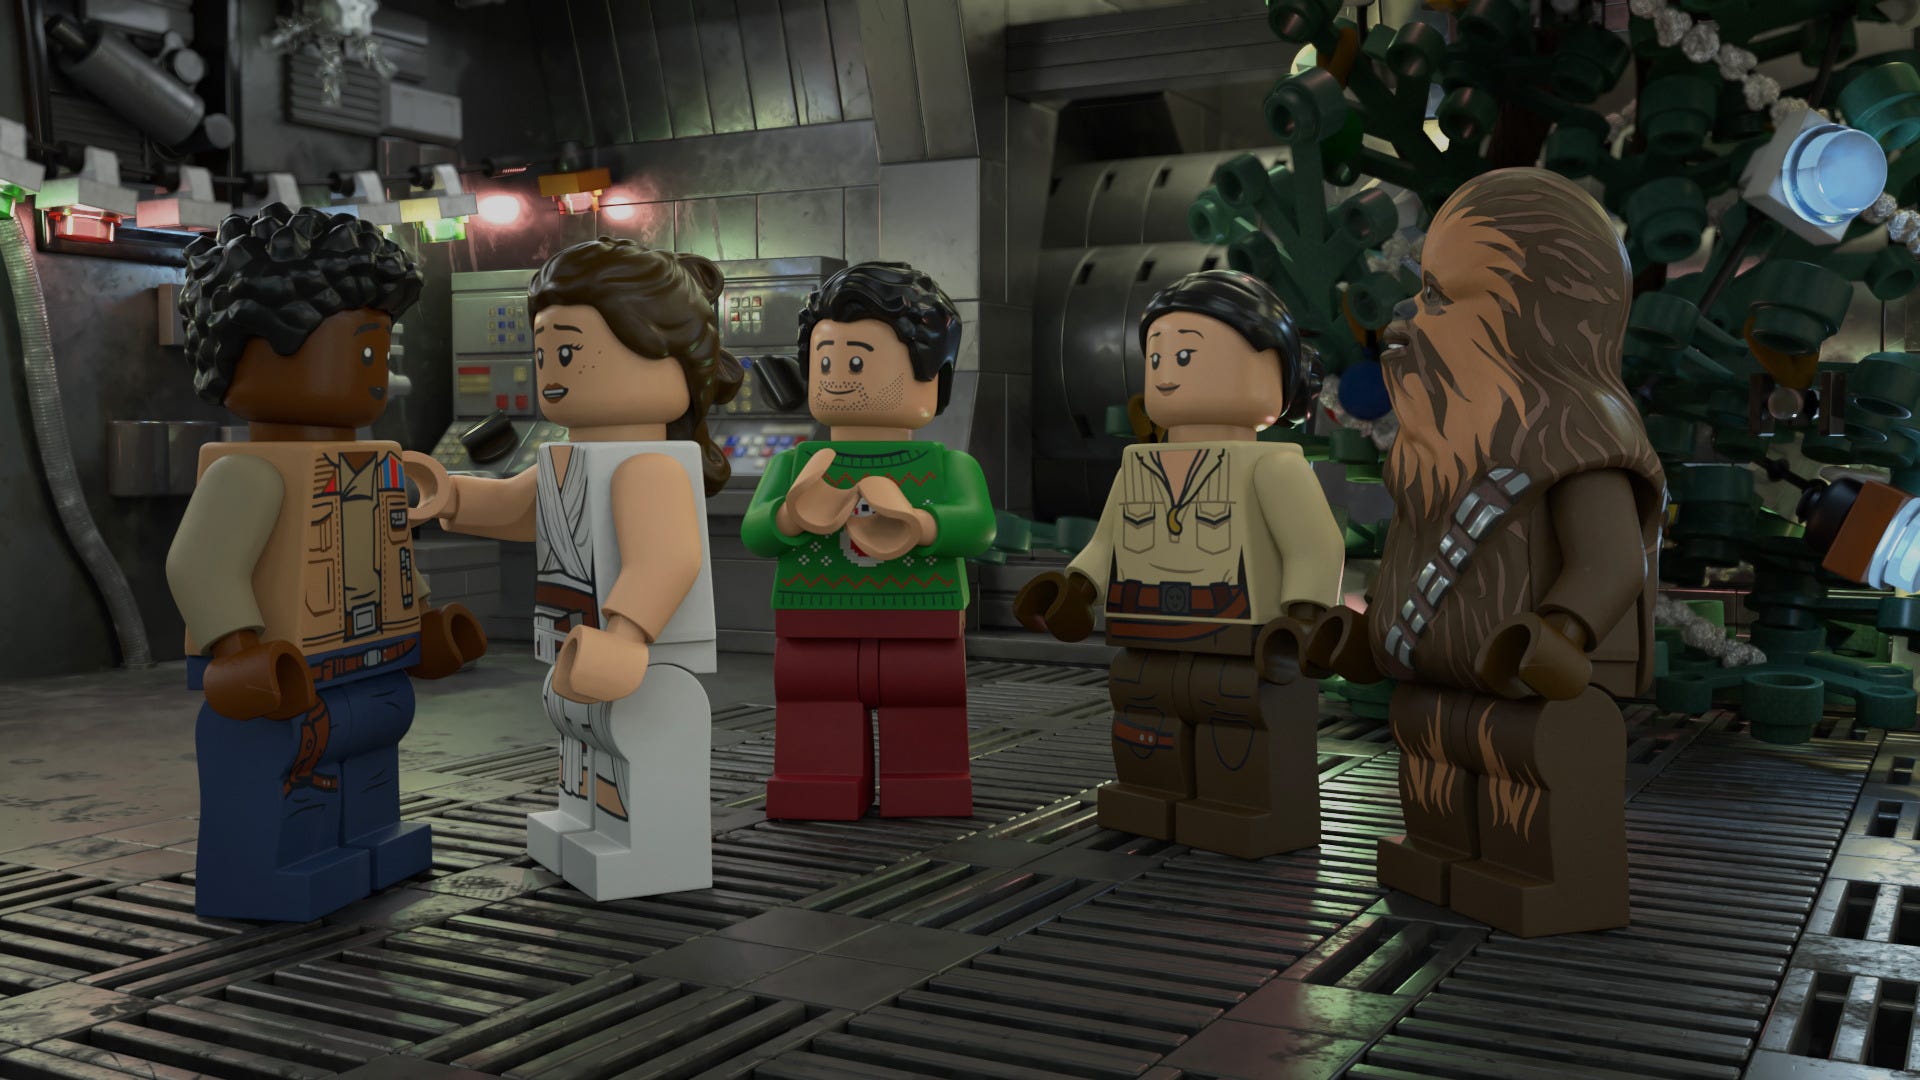 Lego Star Wars Holiday Special Will Introduce Rey to a Young Luke